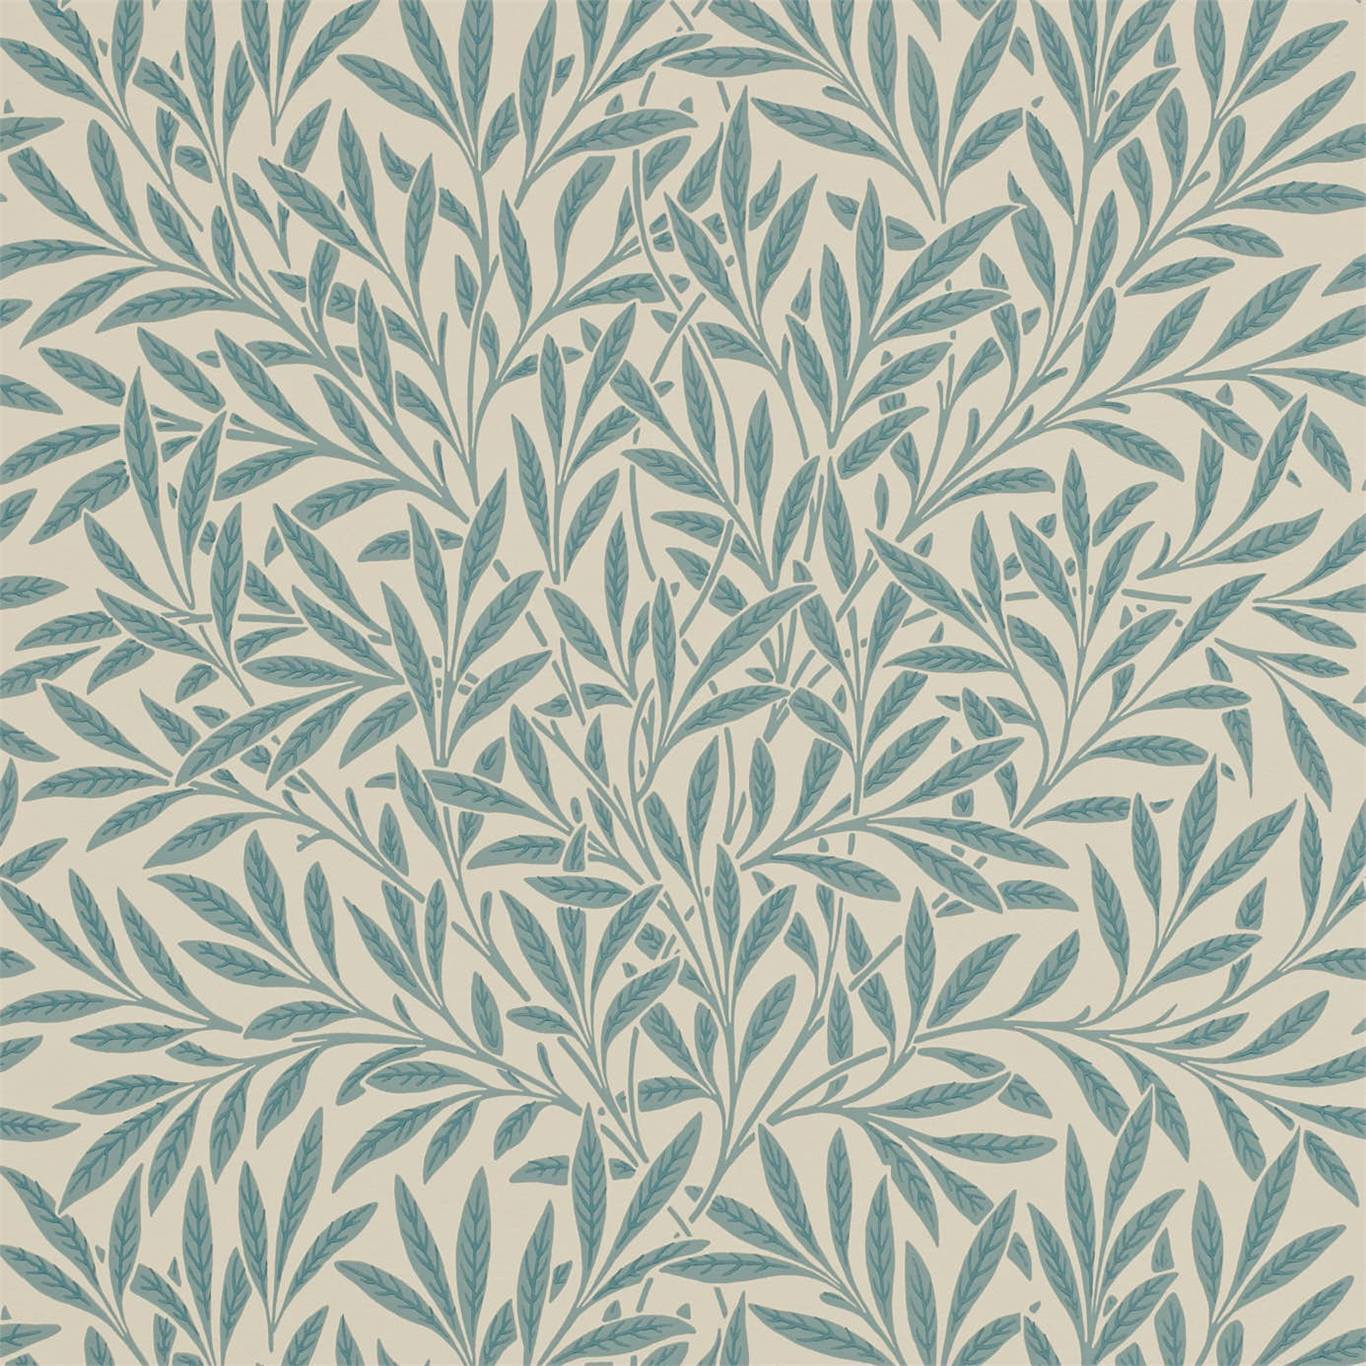 Willow Wallpaper DCMW216817 by Morris & Co